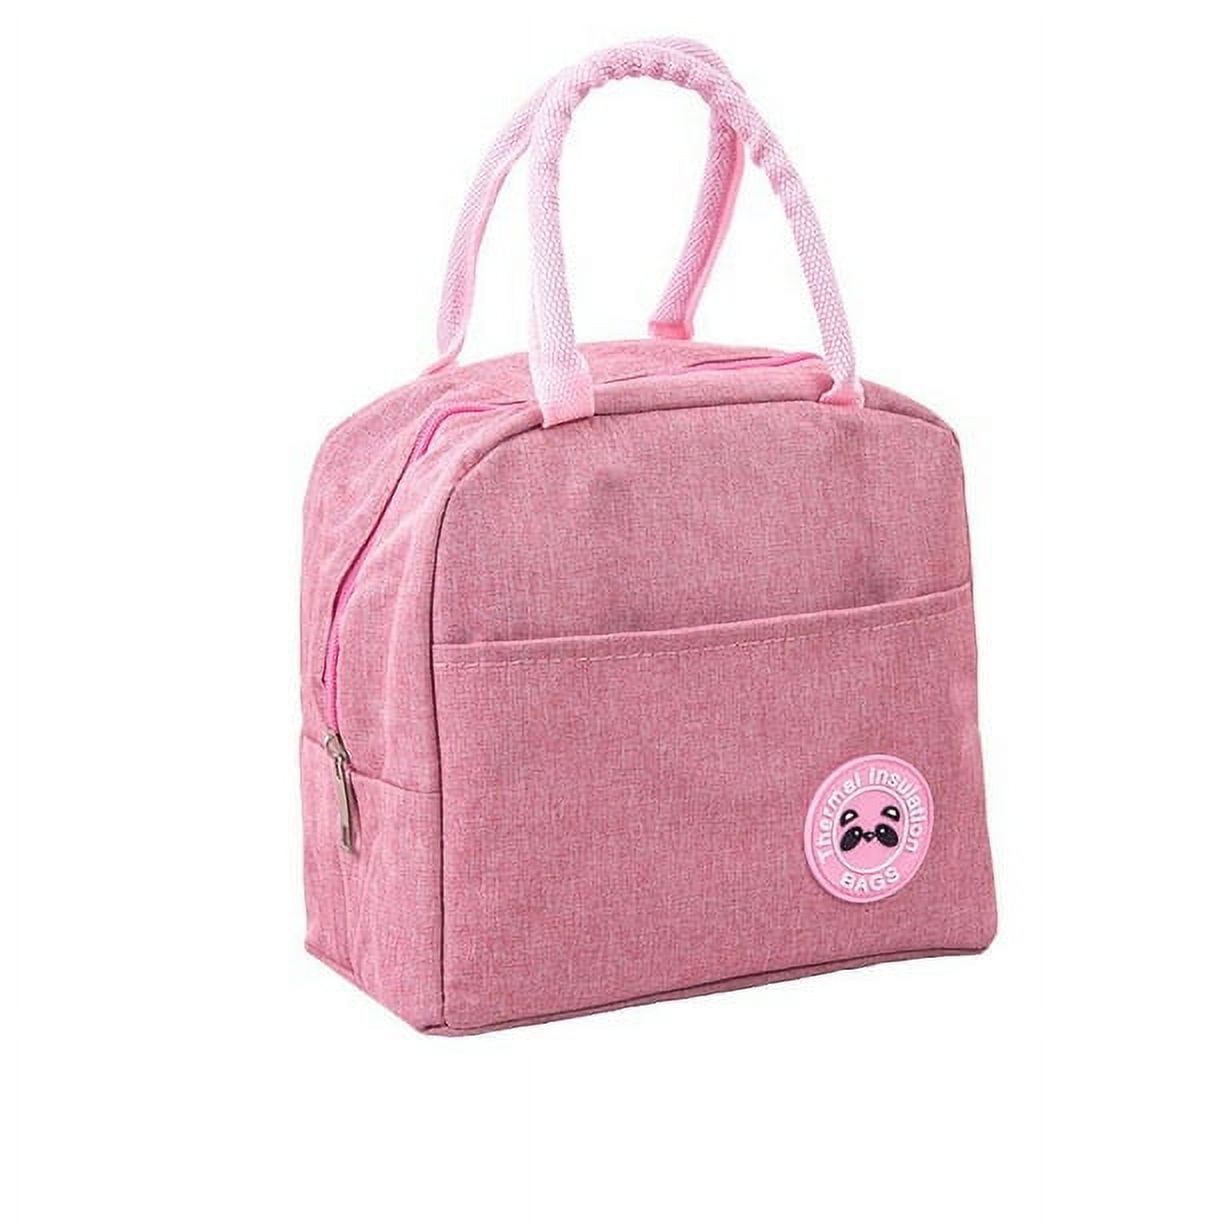 antcreptson Nurse Print Pink Lunch Bag Tote Bag Lunch Bag for Women Lunch  Box Insulated Lunch Container